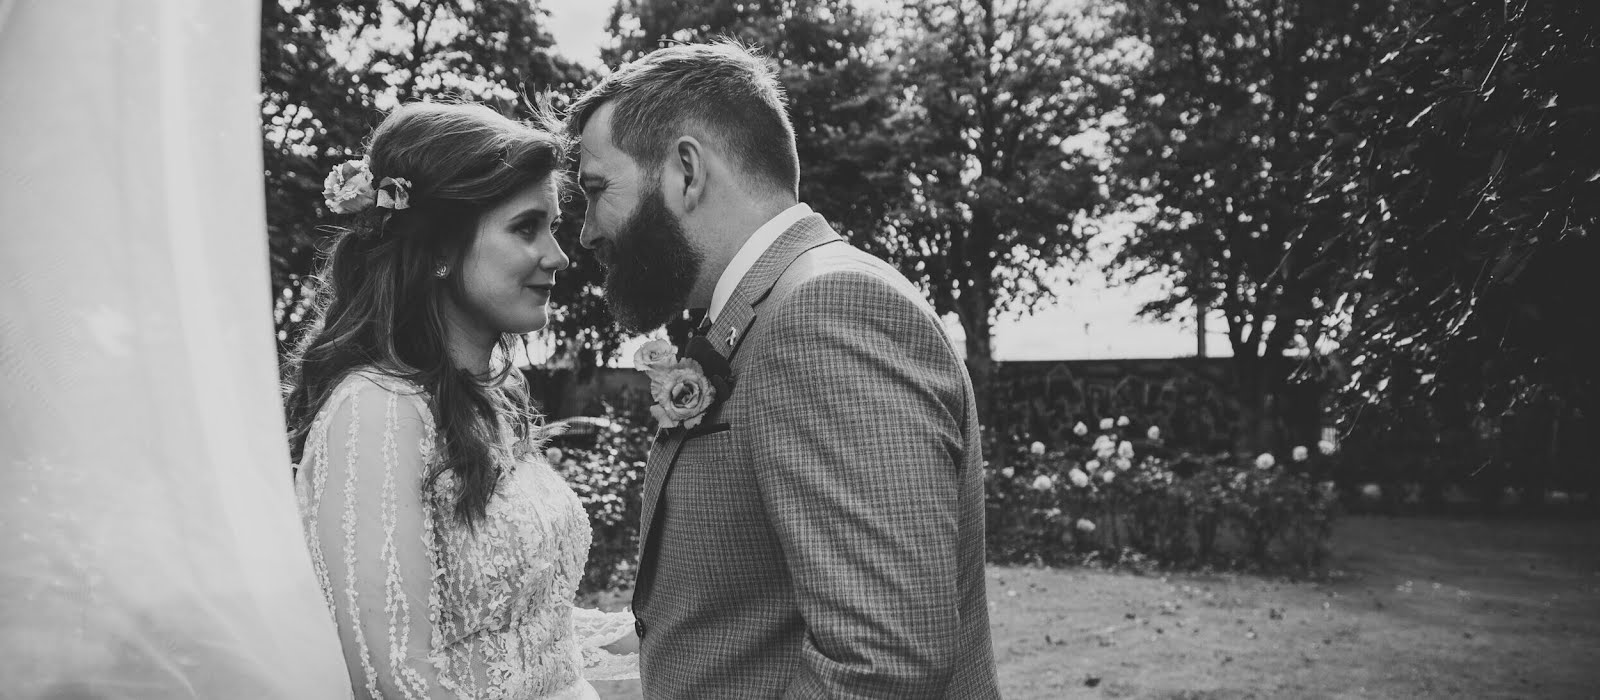 Real Weddings: Anna and Michael’s DIY wedding in Cork